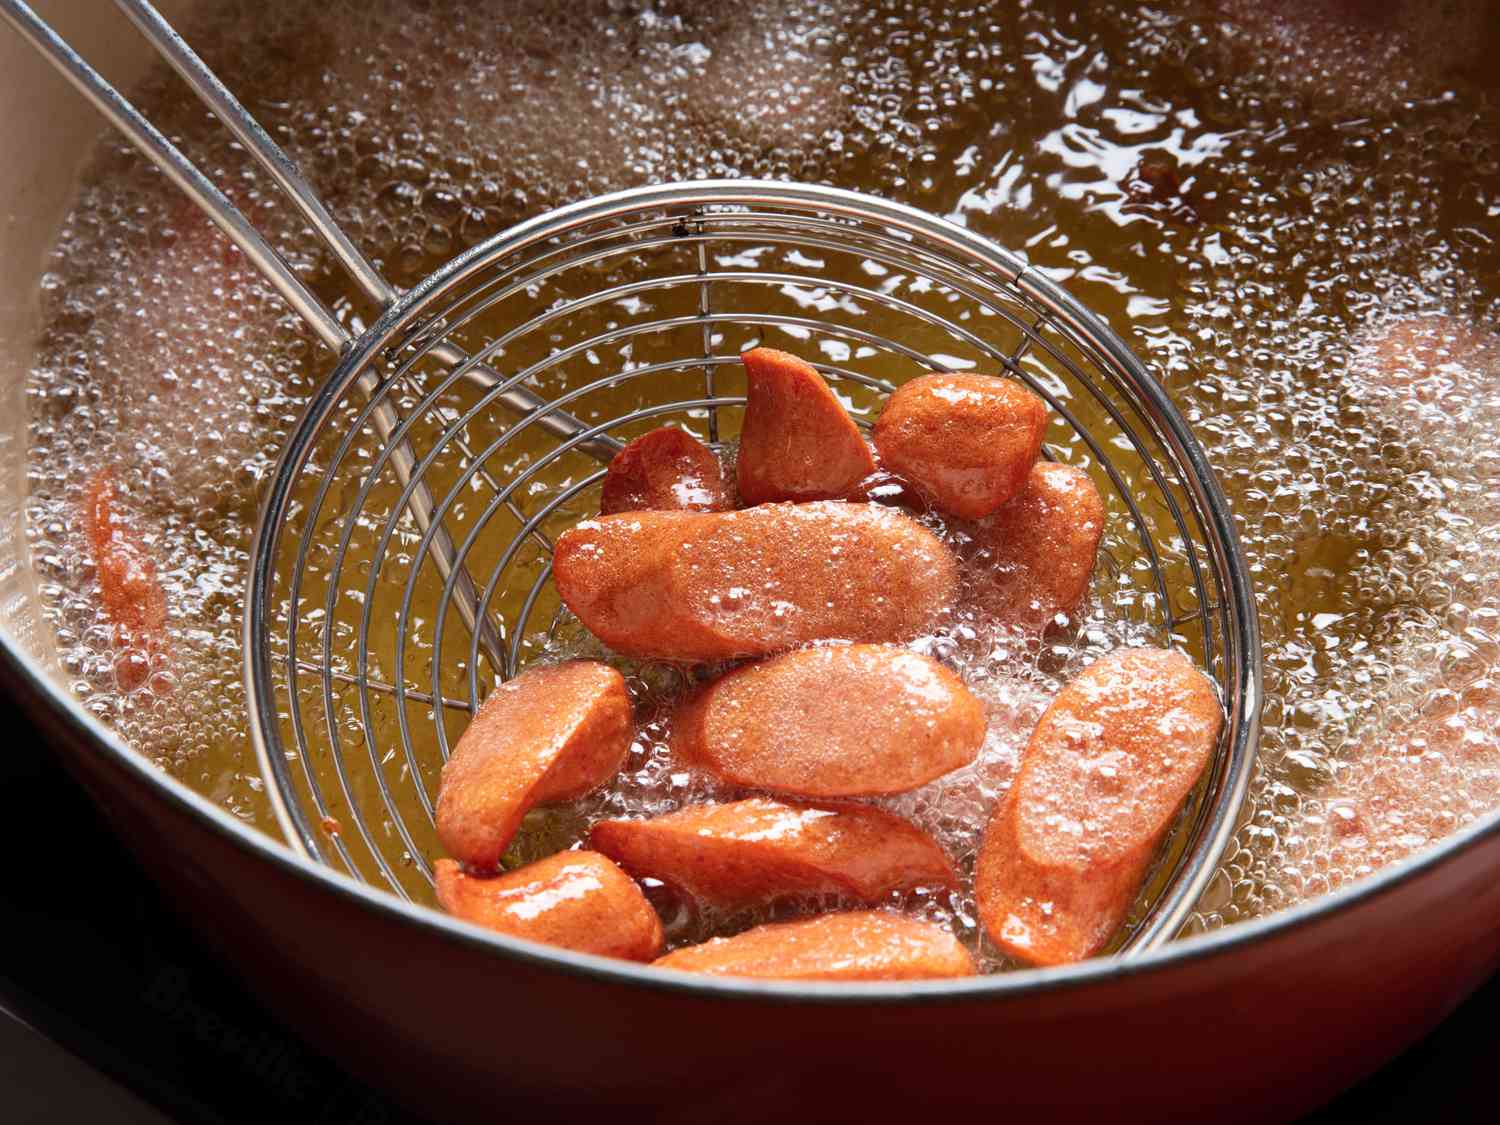 Sliced hotdogs sizzle in a pot of bubbling hot oil.